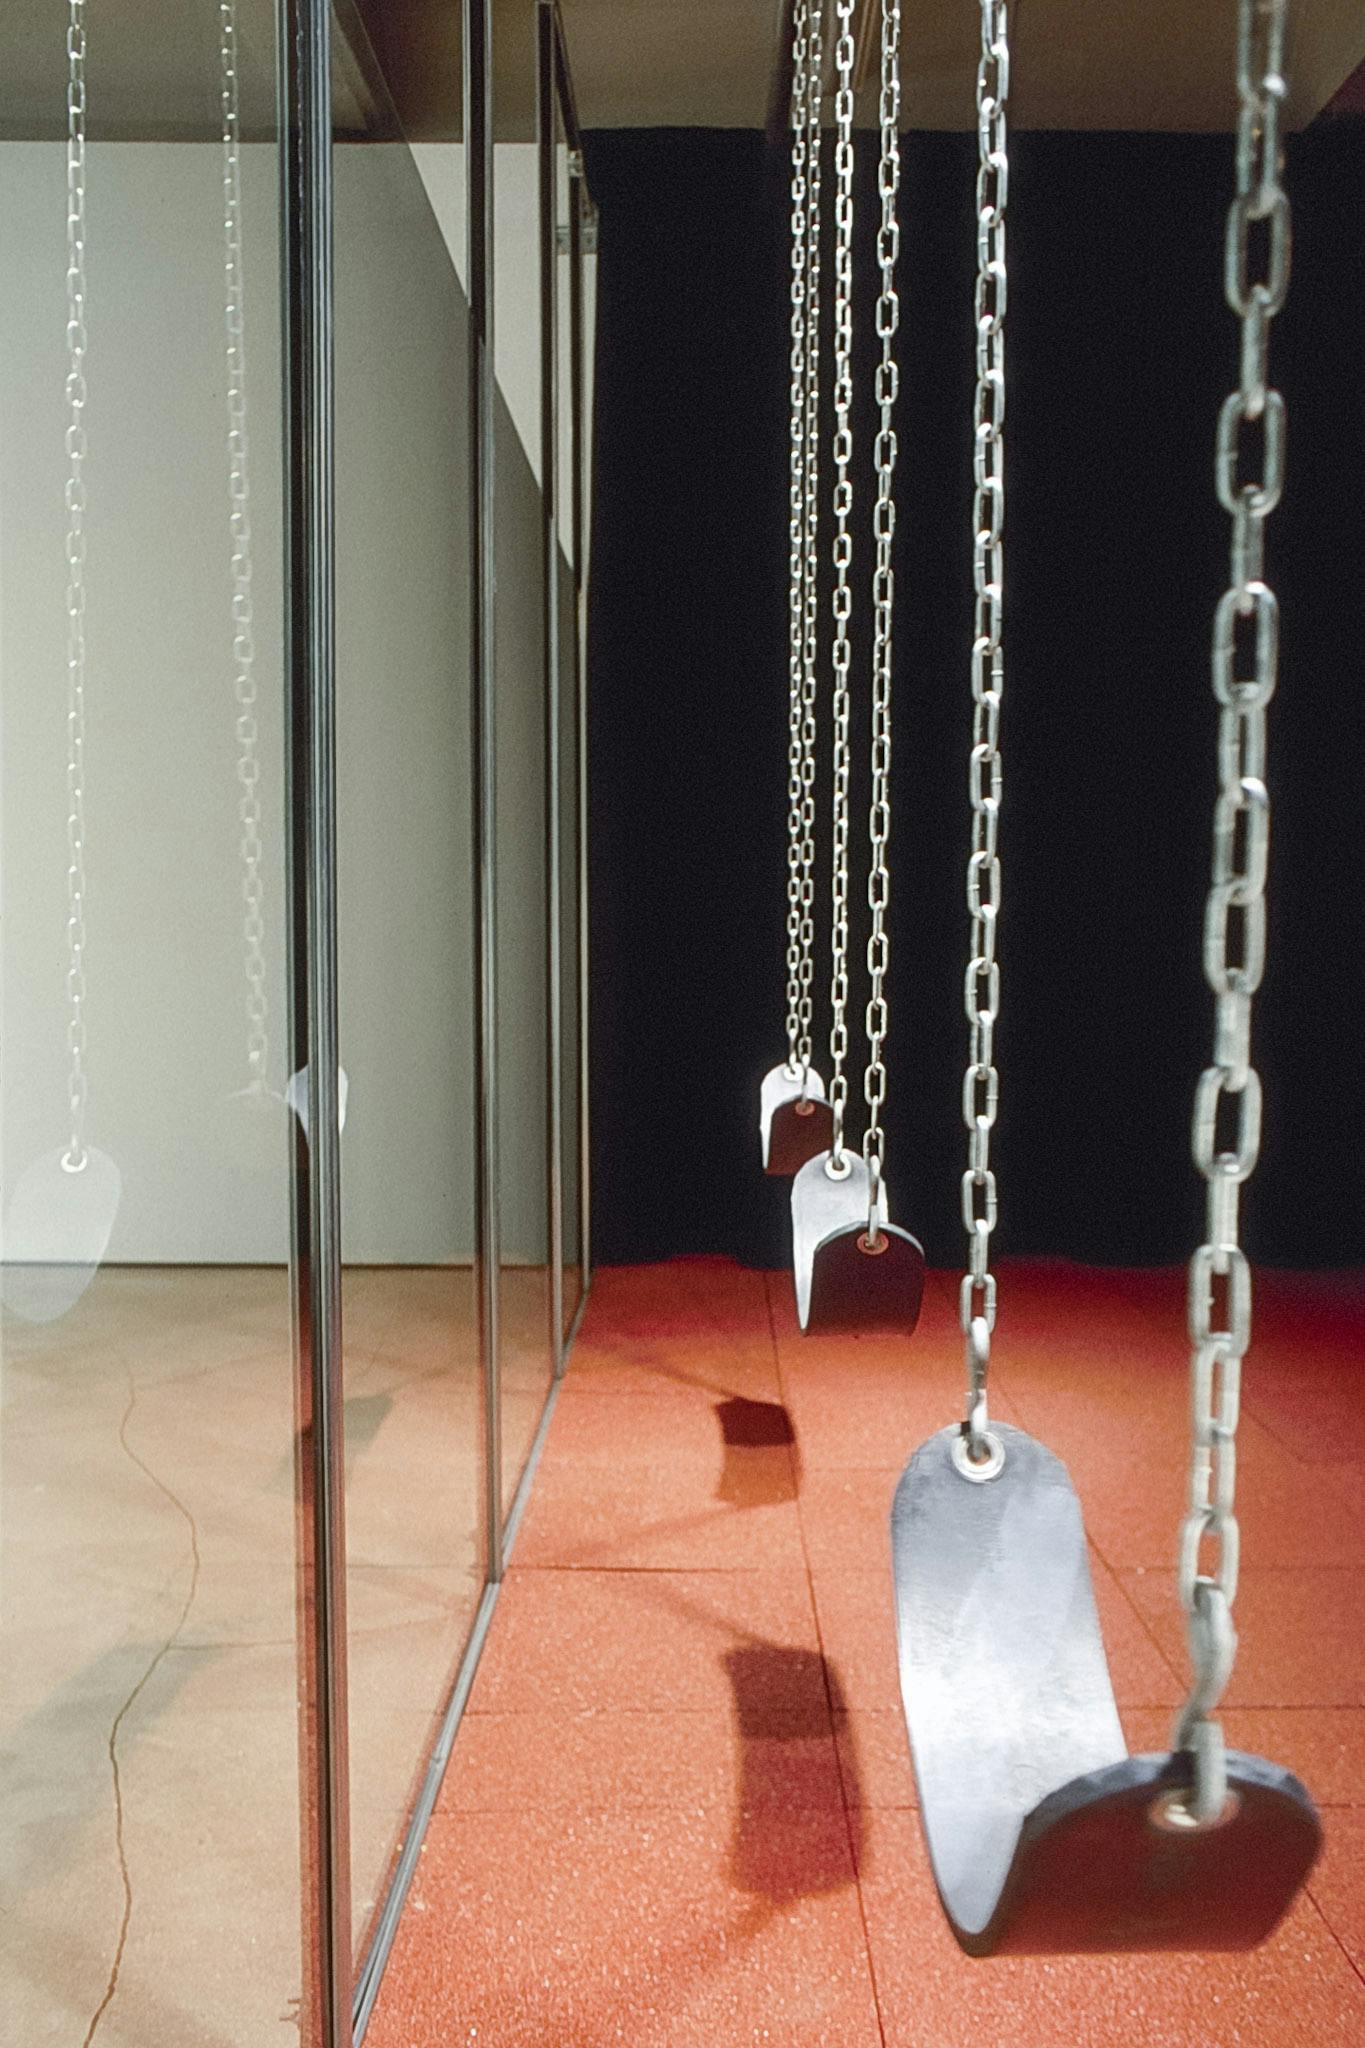 An installation view of three swings in the art gallery space. The black rubbered seats with silver chains are hung from the ceiling. The swings are placed right next to the large glass window.